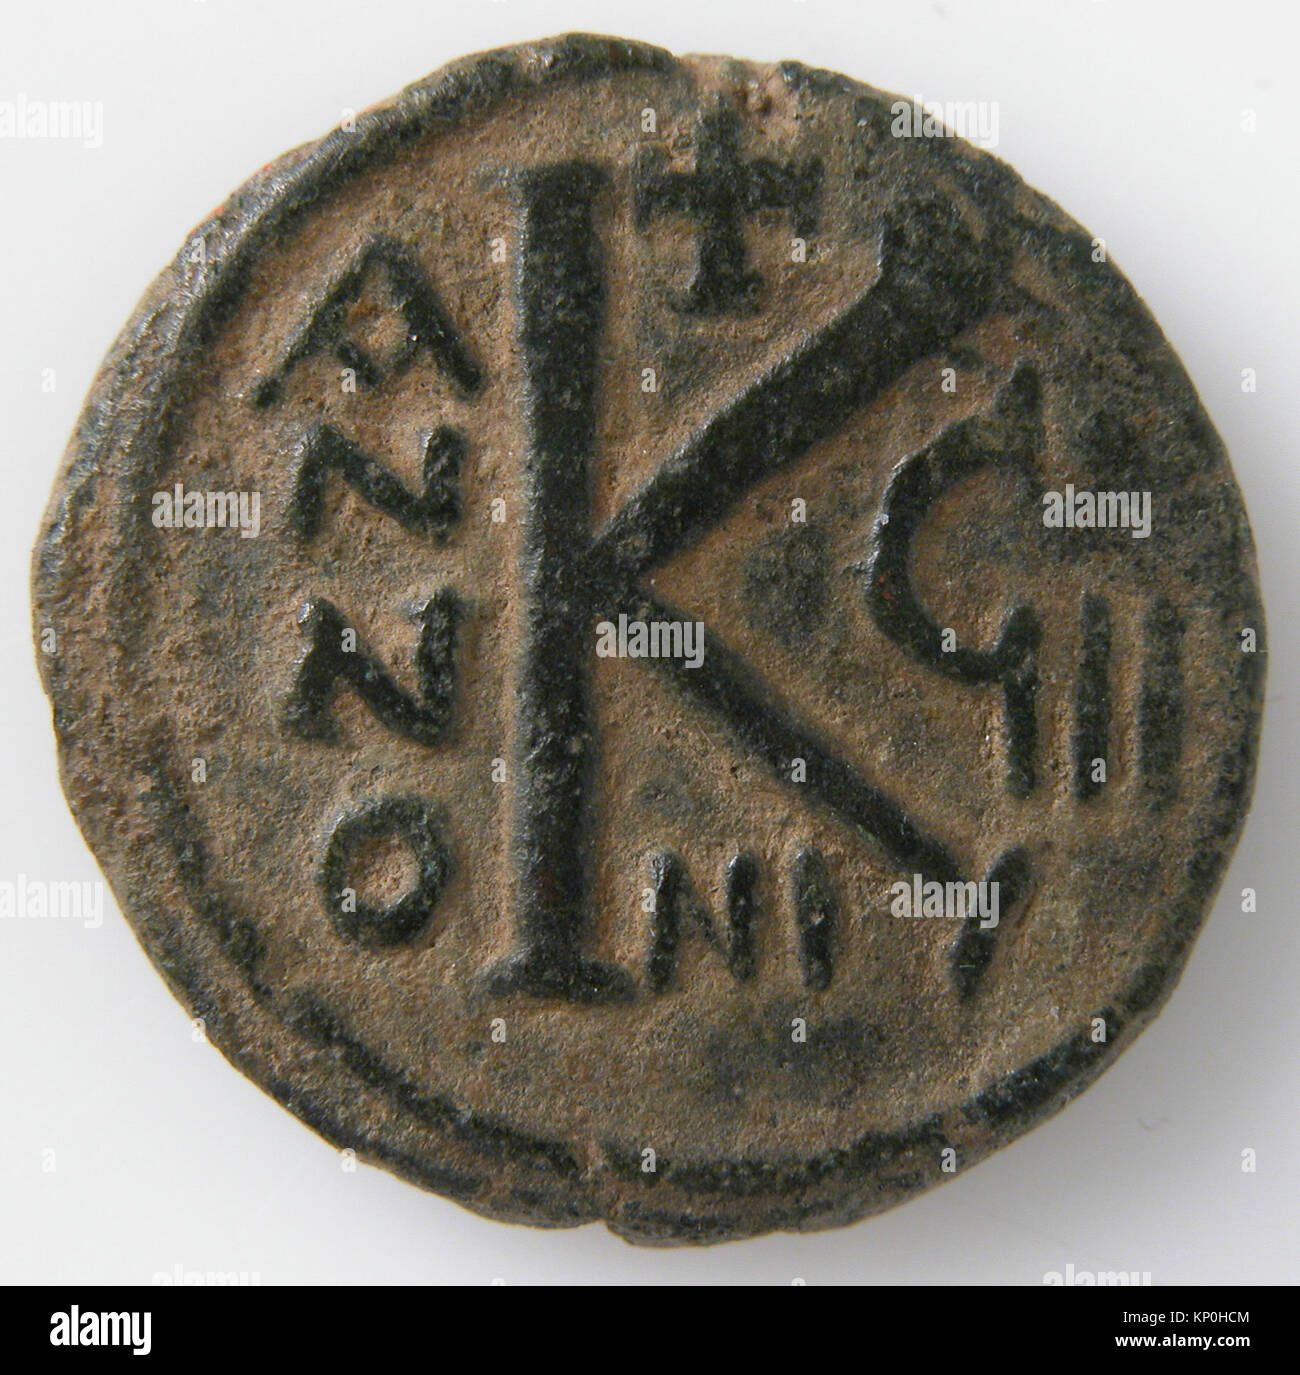 Coin of Justin II MET sf17-6-95s2 465912 Byzantine, Coin of Justin II